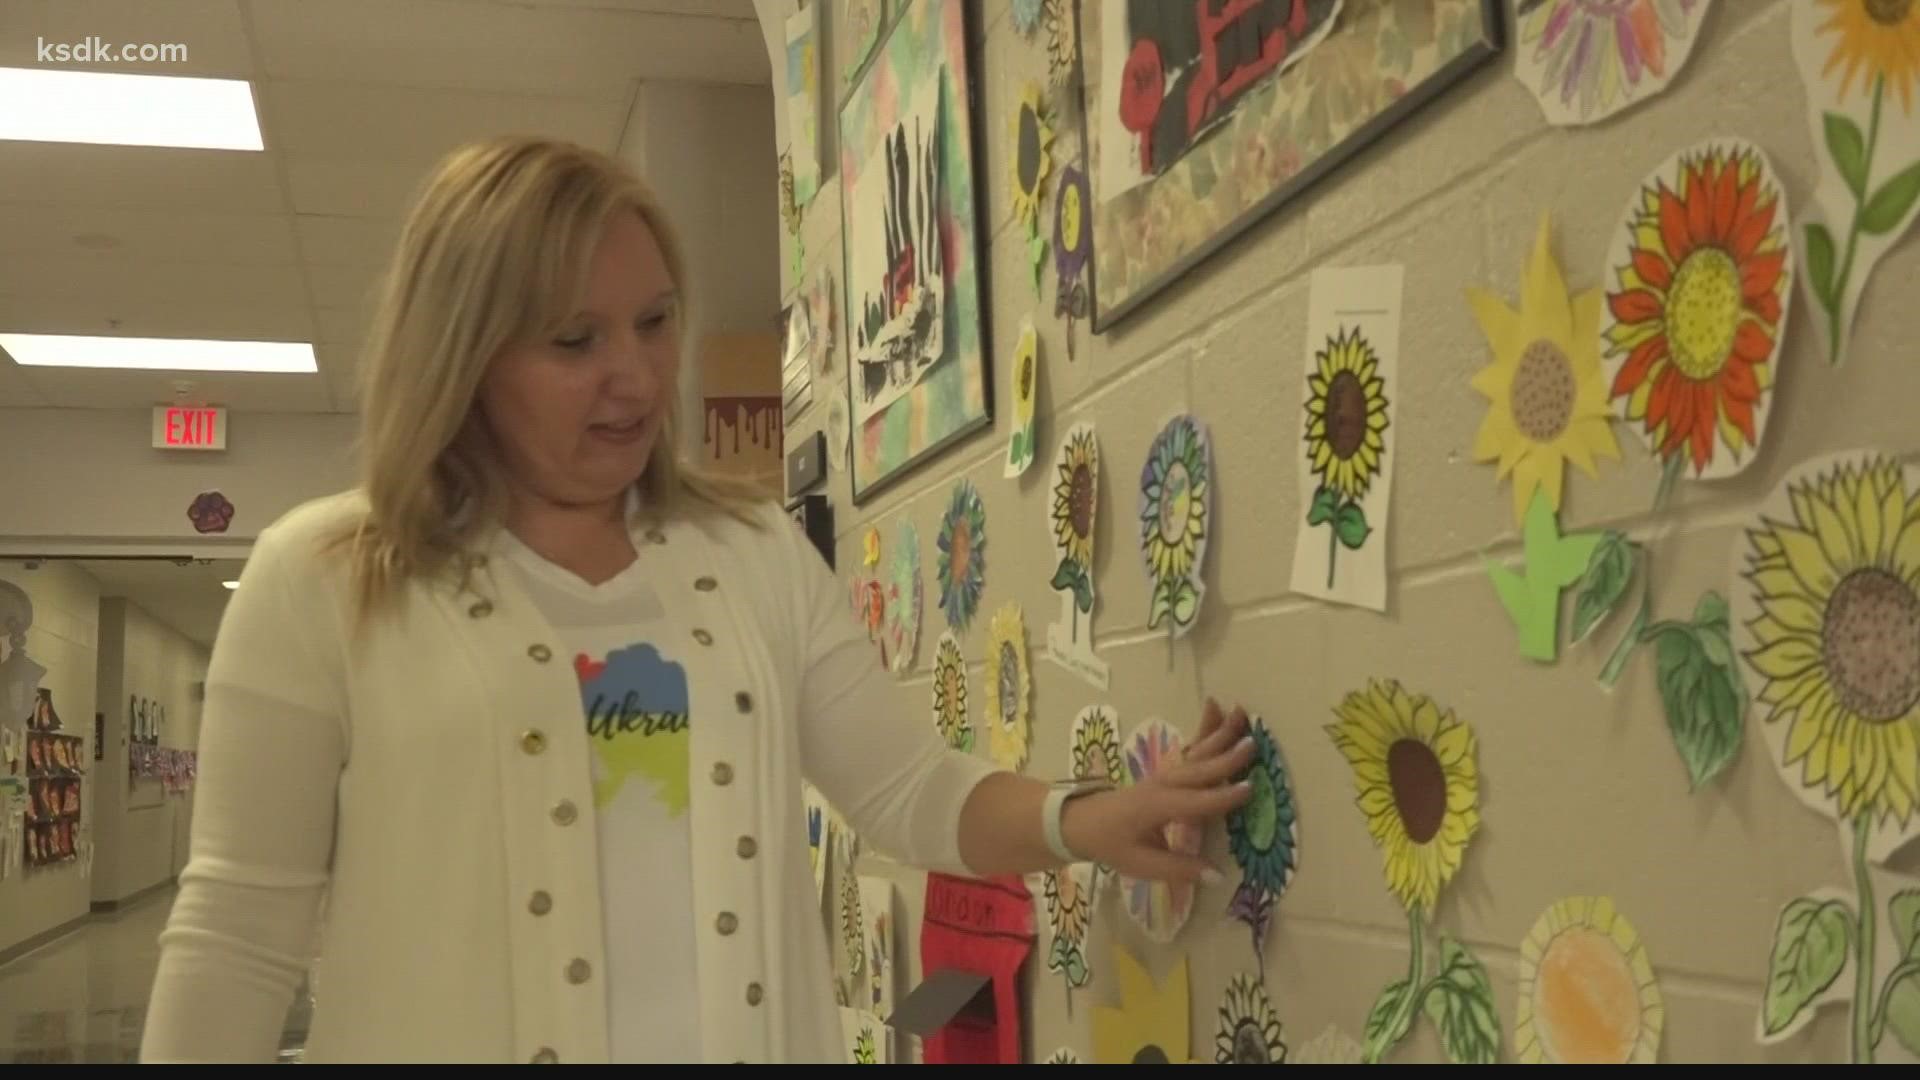 A Jefferson County art teacher is from Ukraine and many of her family members are still there. Her students decided to try and bring hope to a difficult situation.